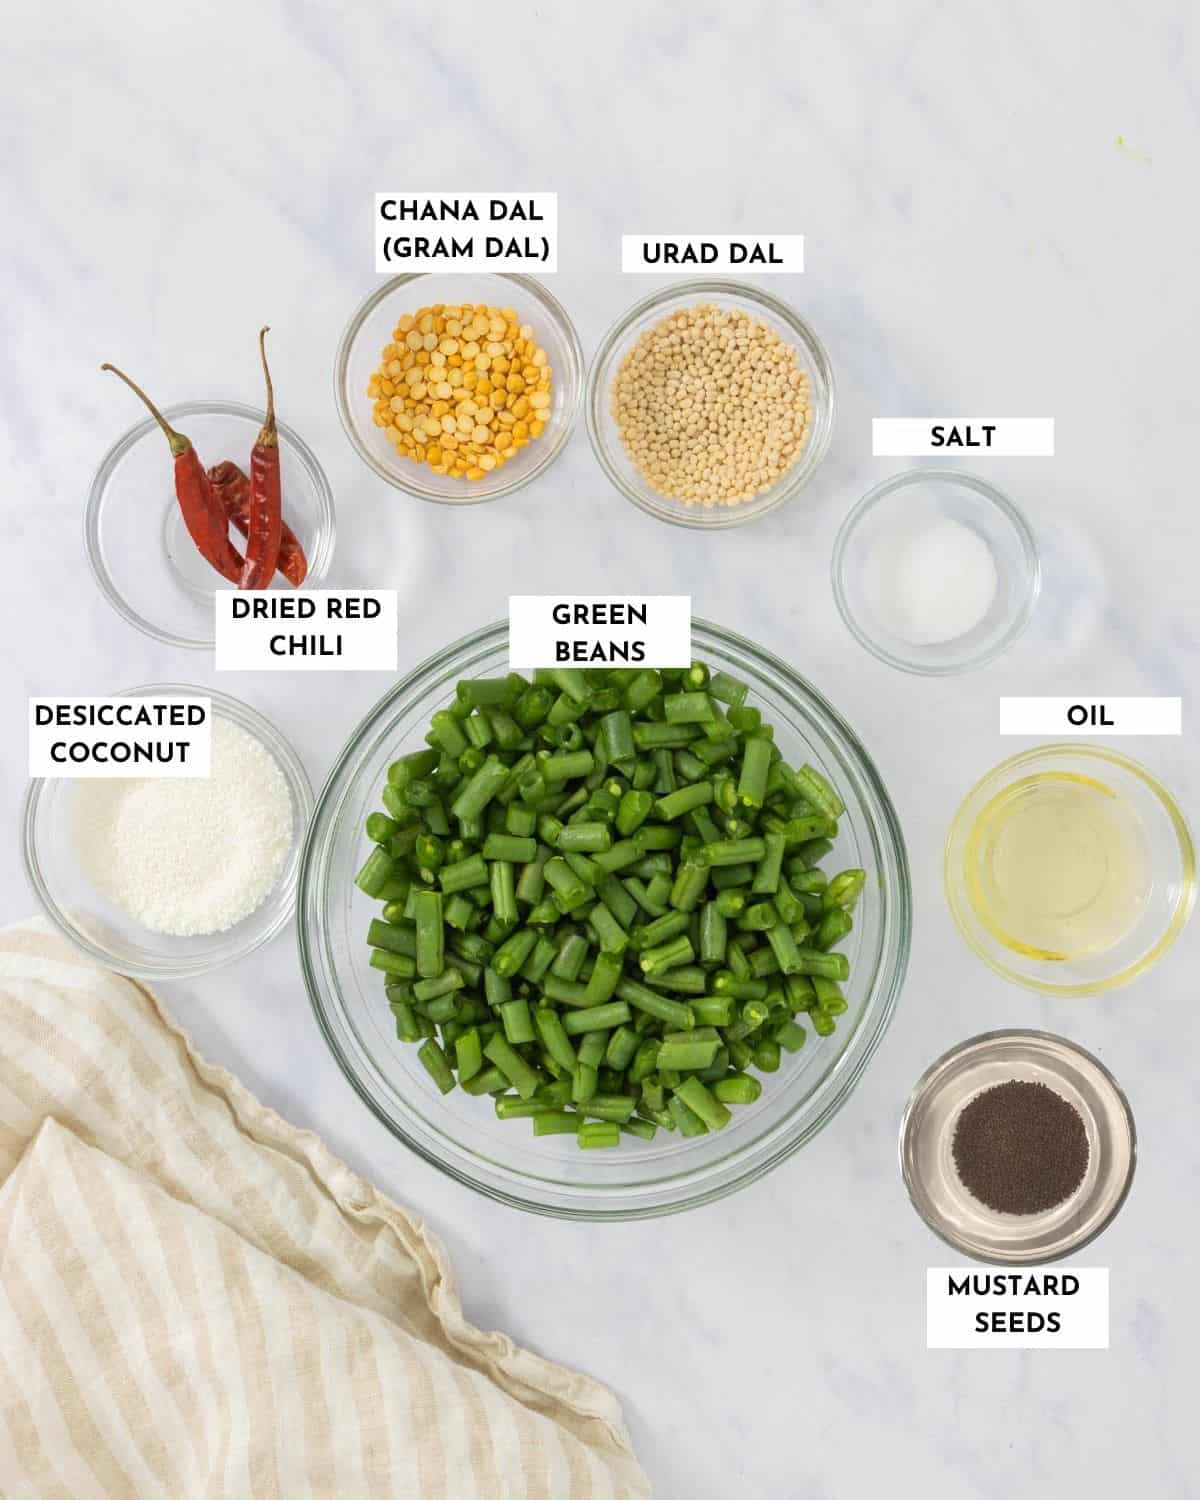 Labeled ingredient list - check recipe card for details and quantities!